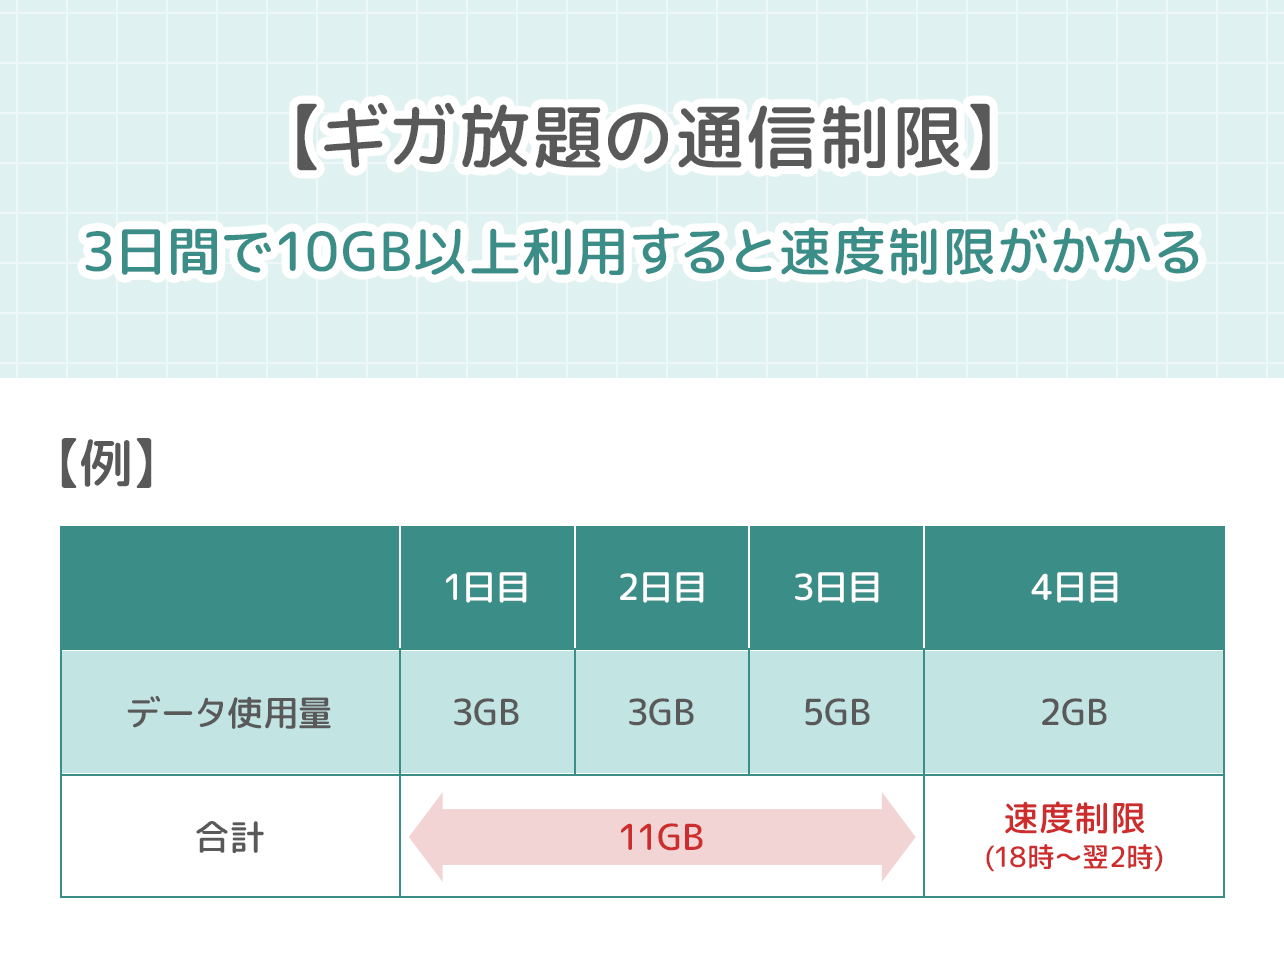 WiMAX「ギガ放題（WiMAX 2+）」の通信制限